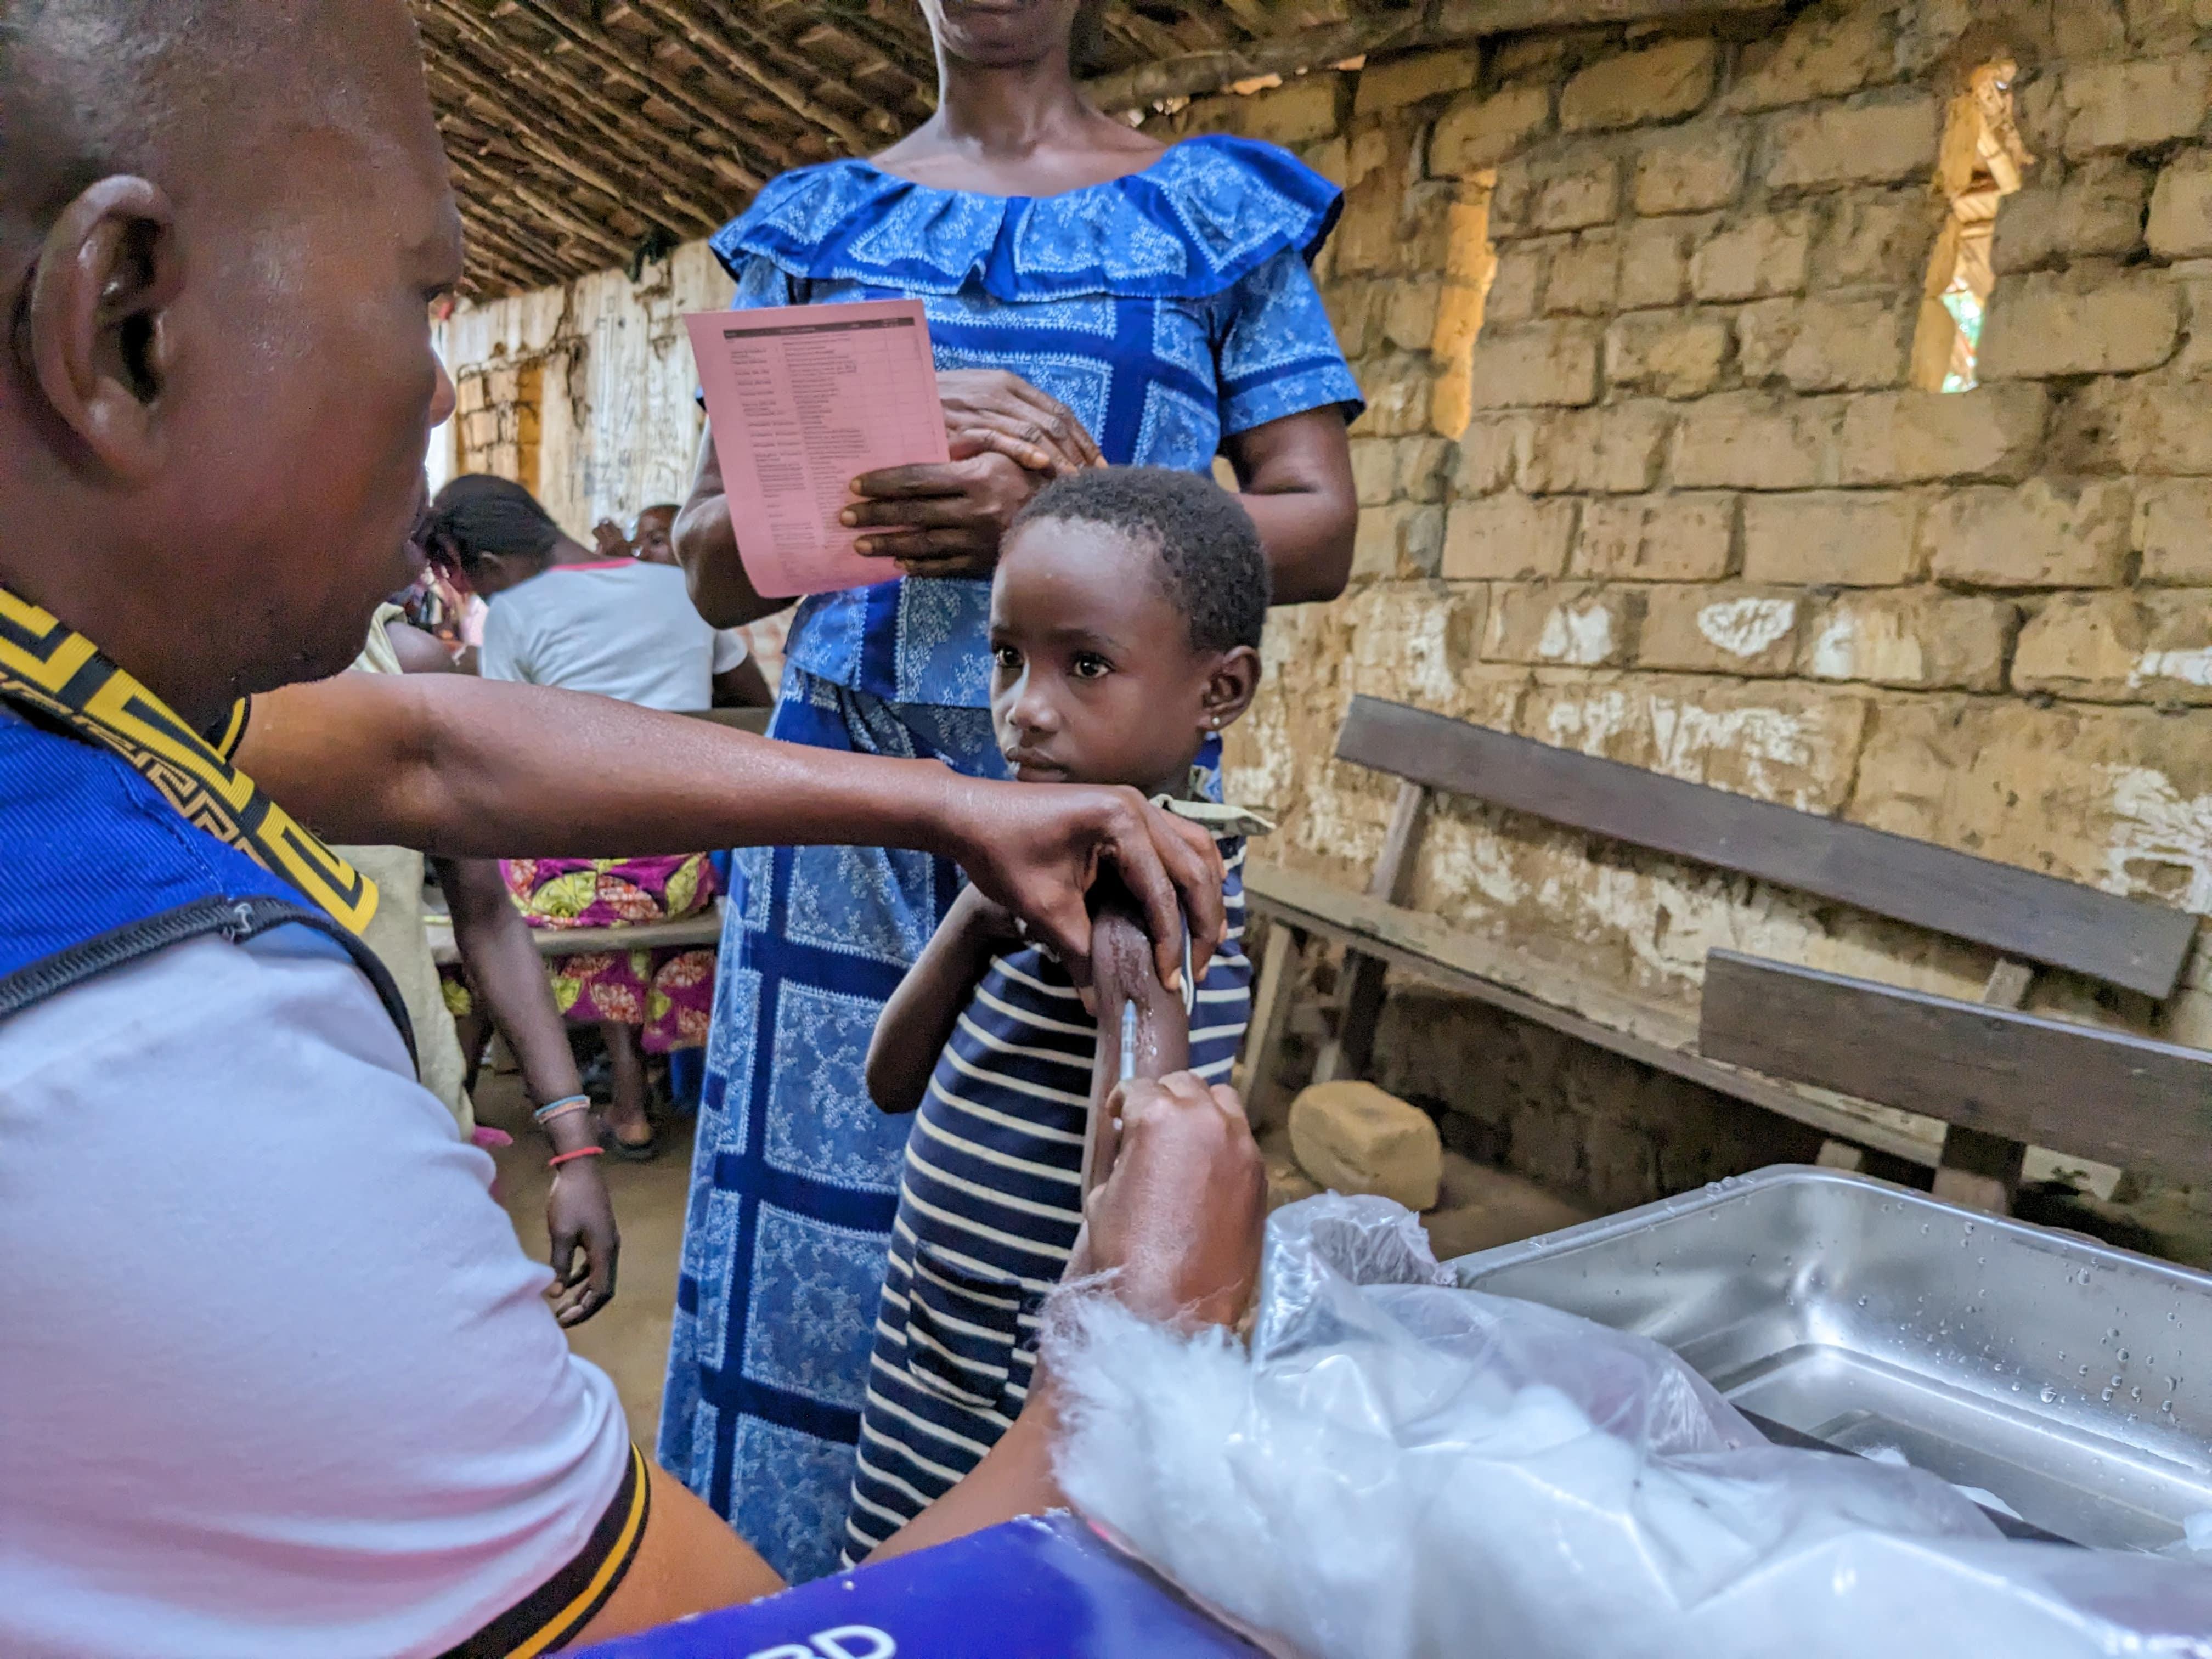 MSF Emergency Response DRC Measles: Measles vaccination campaign carried out by MSF in the Ingende health zone, Equateur province.  During this emergency campaign, 62,645 children aged between 6 months and 9 years were vaccinated against measles in the 18 health areas in the zone.